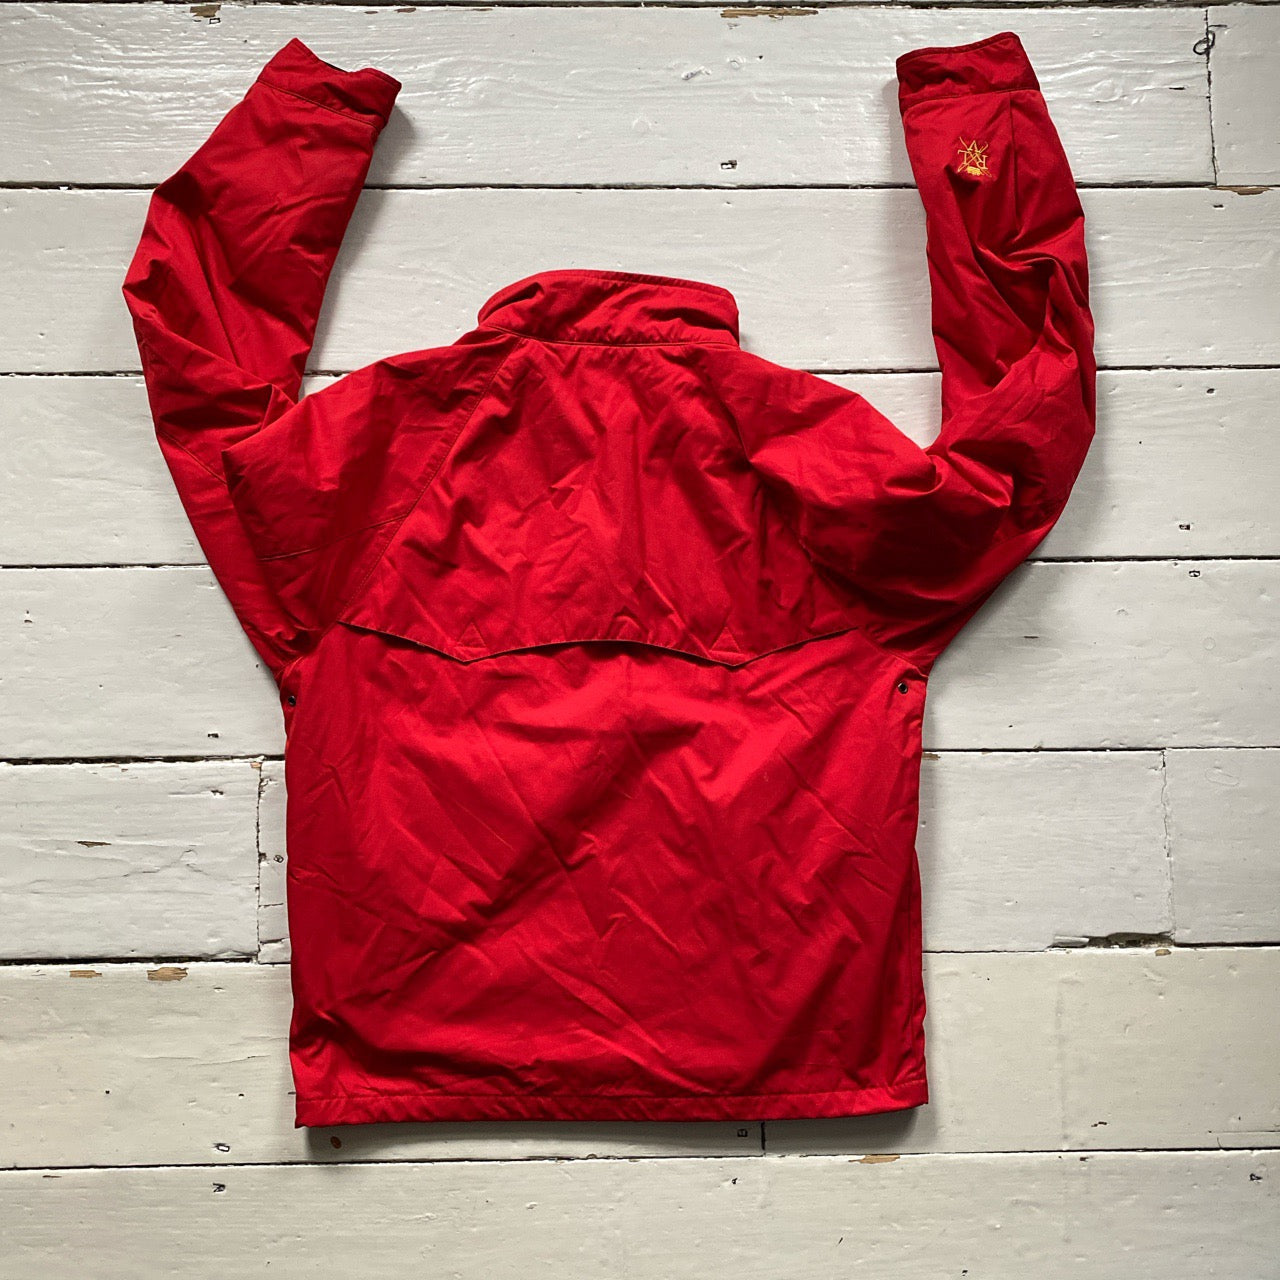 Ralph Lauren Polo Red Bomber Jacket (Small)